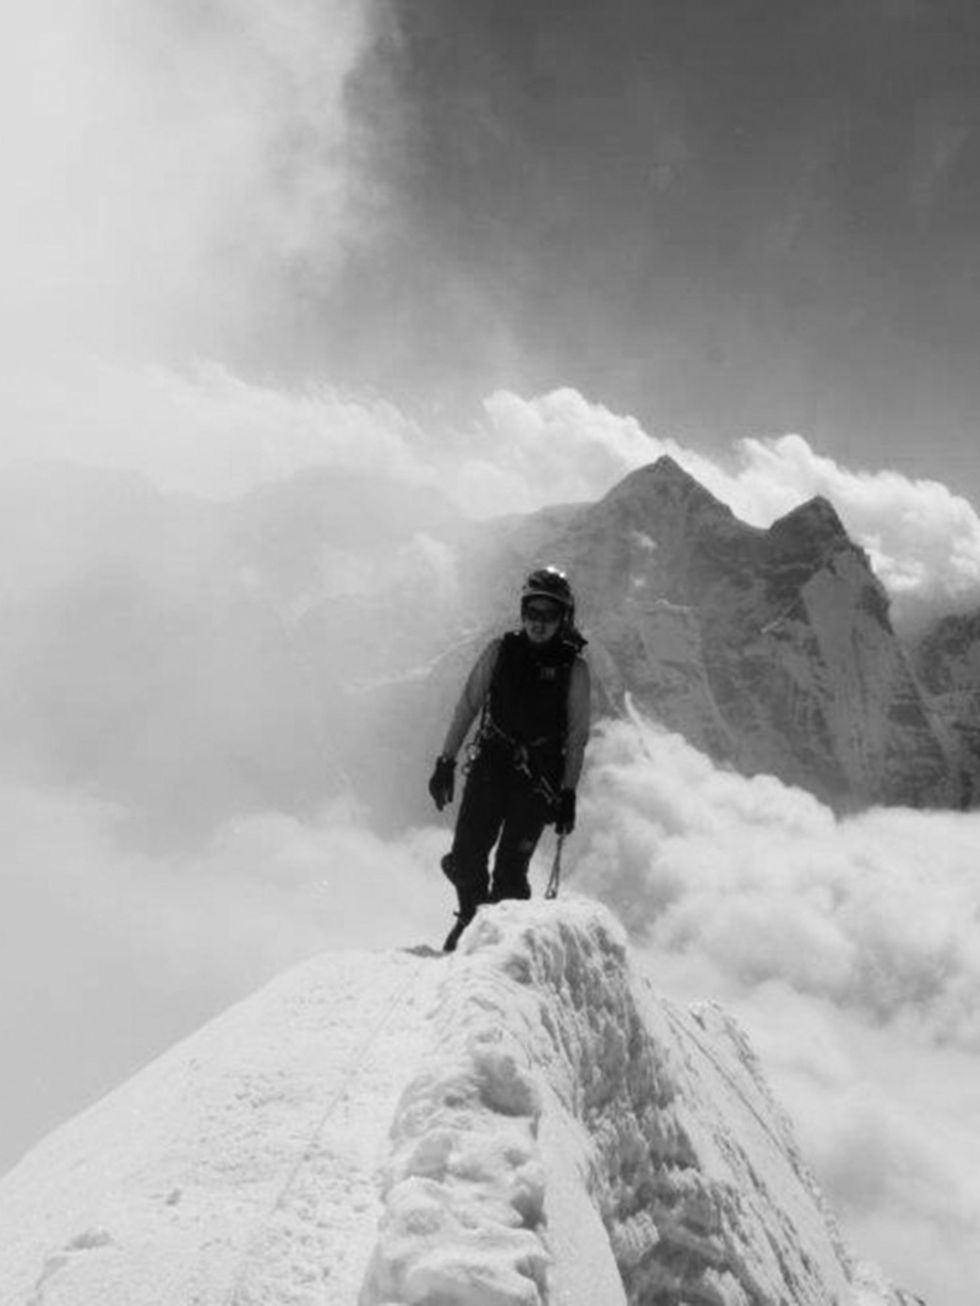 <p>Bonita Norris, 27, <span style="line-height:1.6">Expeditionist</span></p>

<p>A typical day for Bonita is quite literally spent on top of the world. She is the youngest person to reach both the summit of Mount Everest (back in 2010, aged 22), and the N